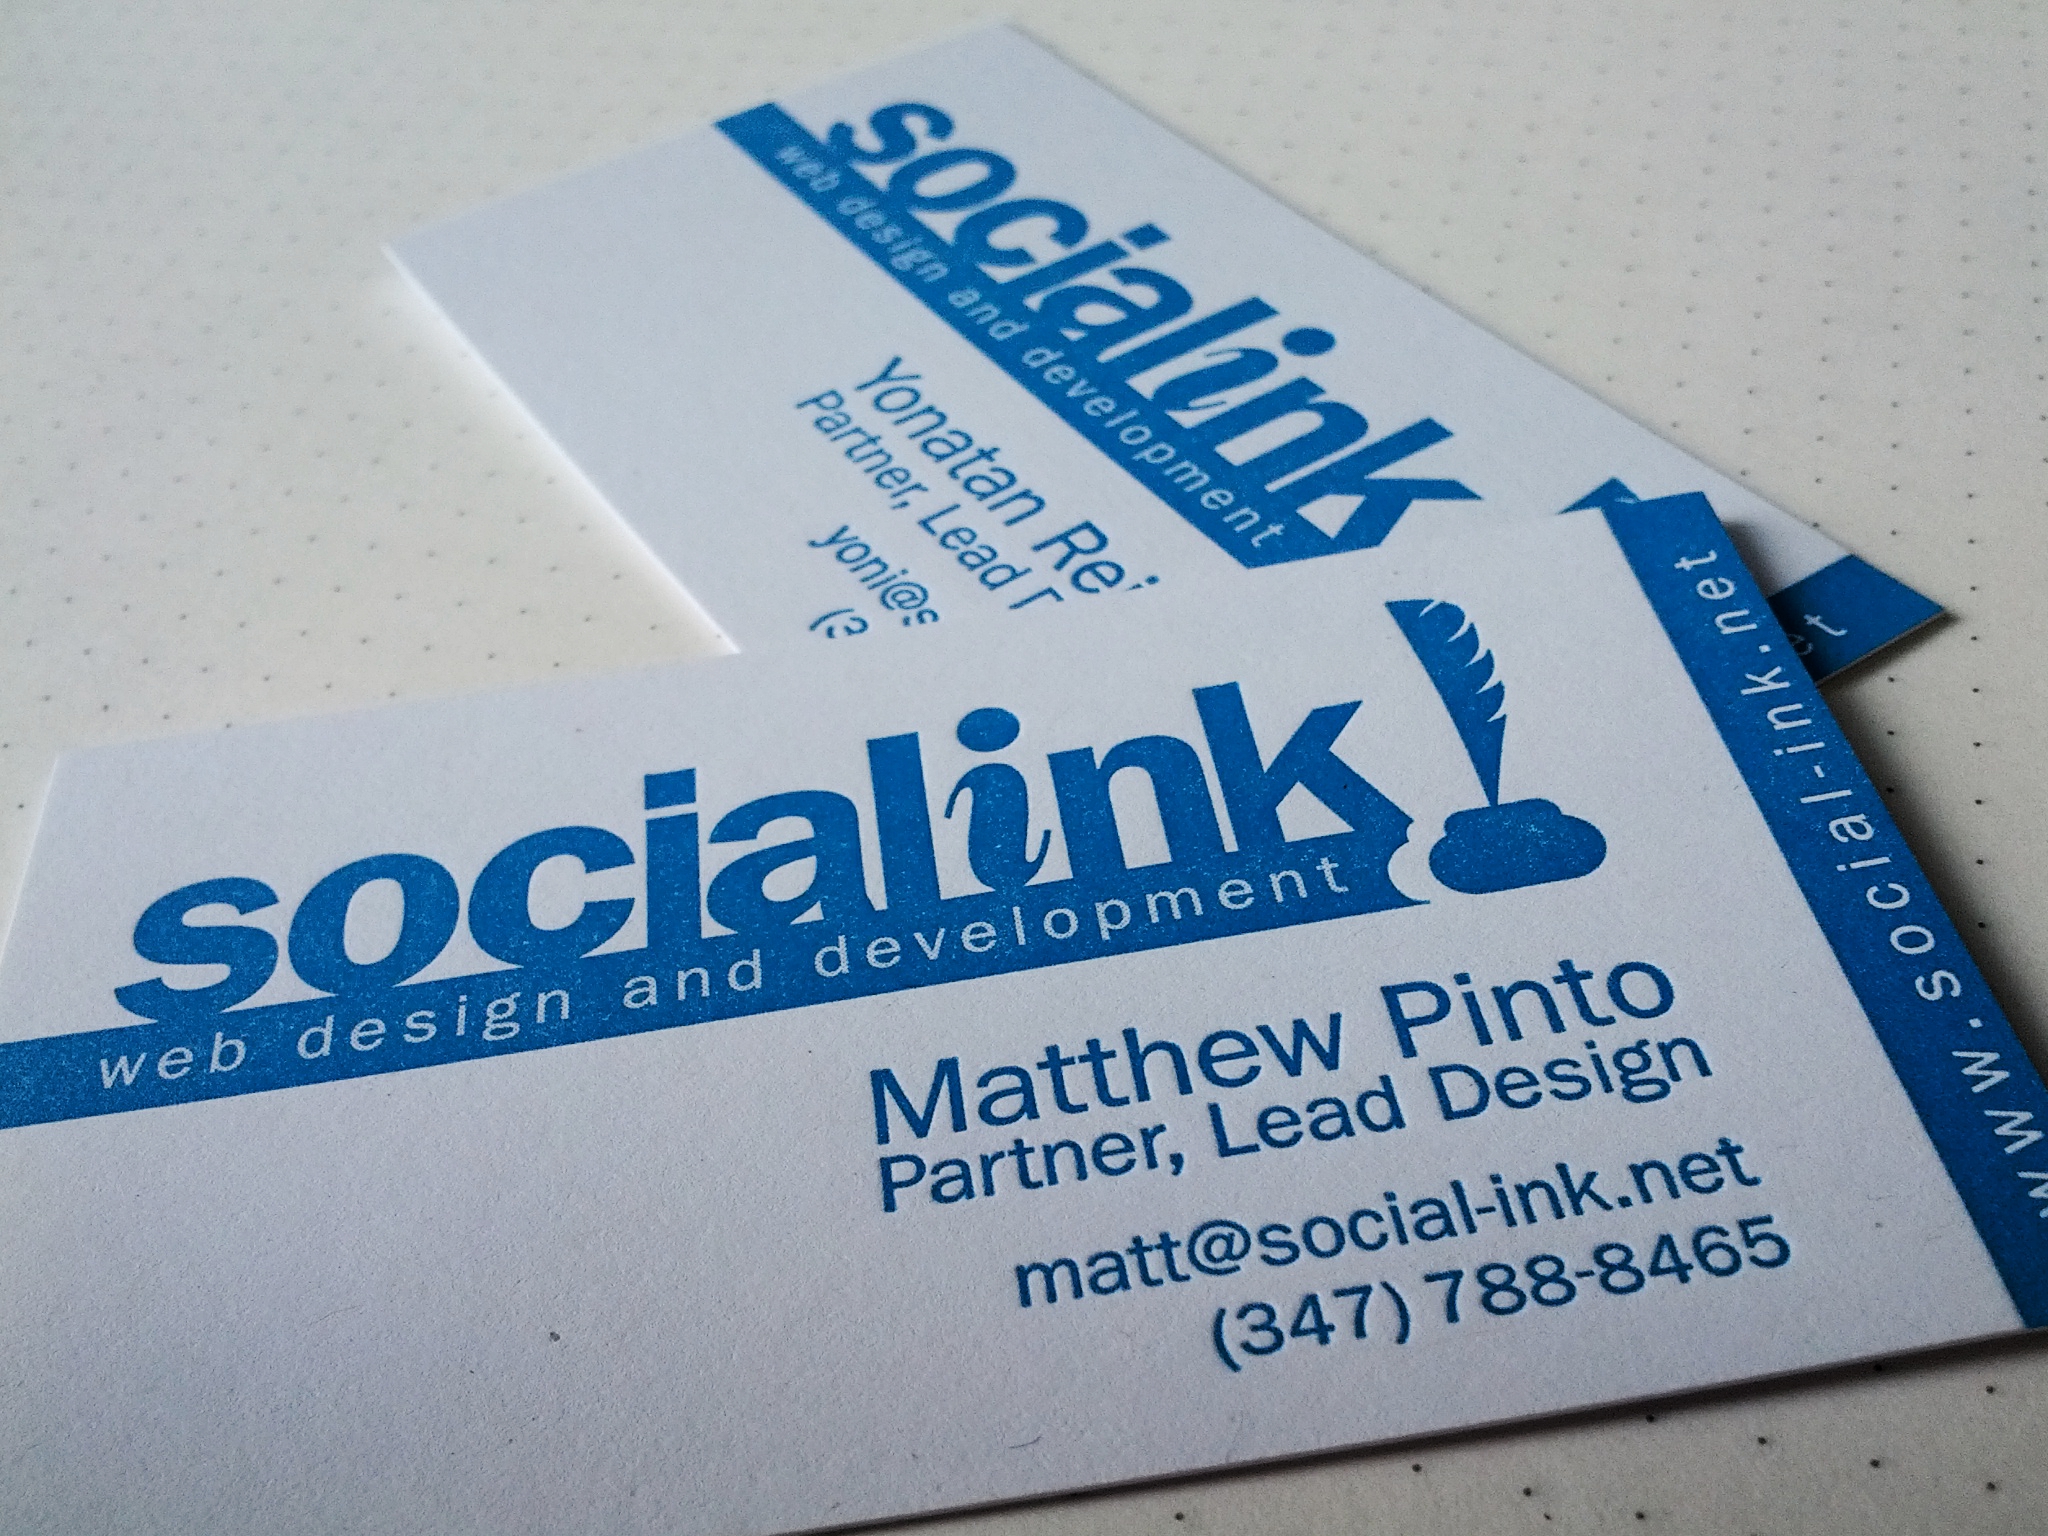 Our new business cards are here!